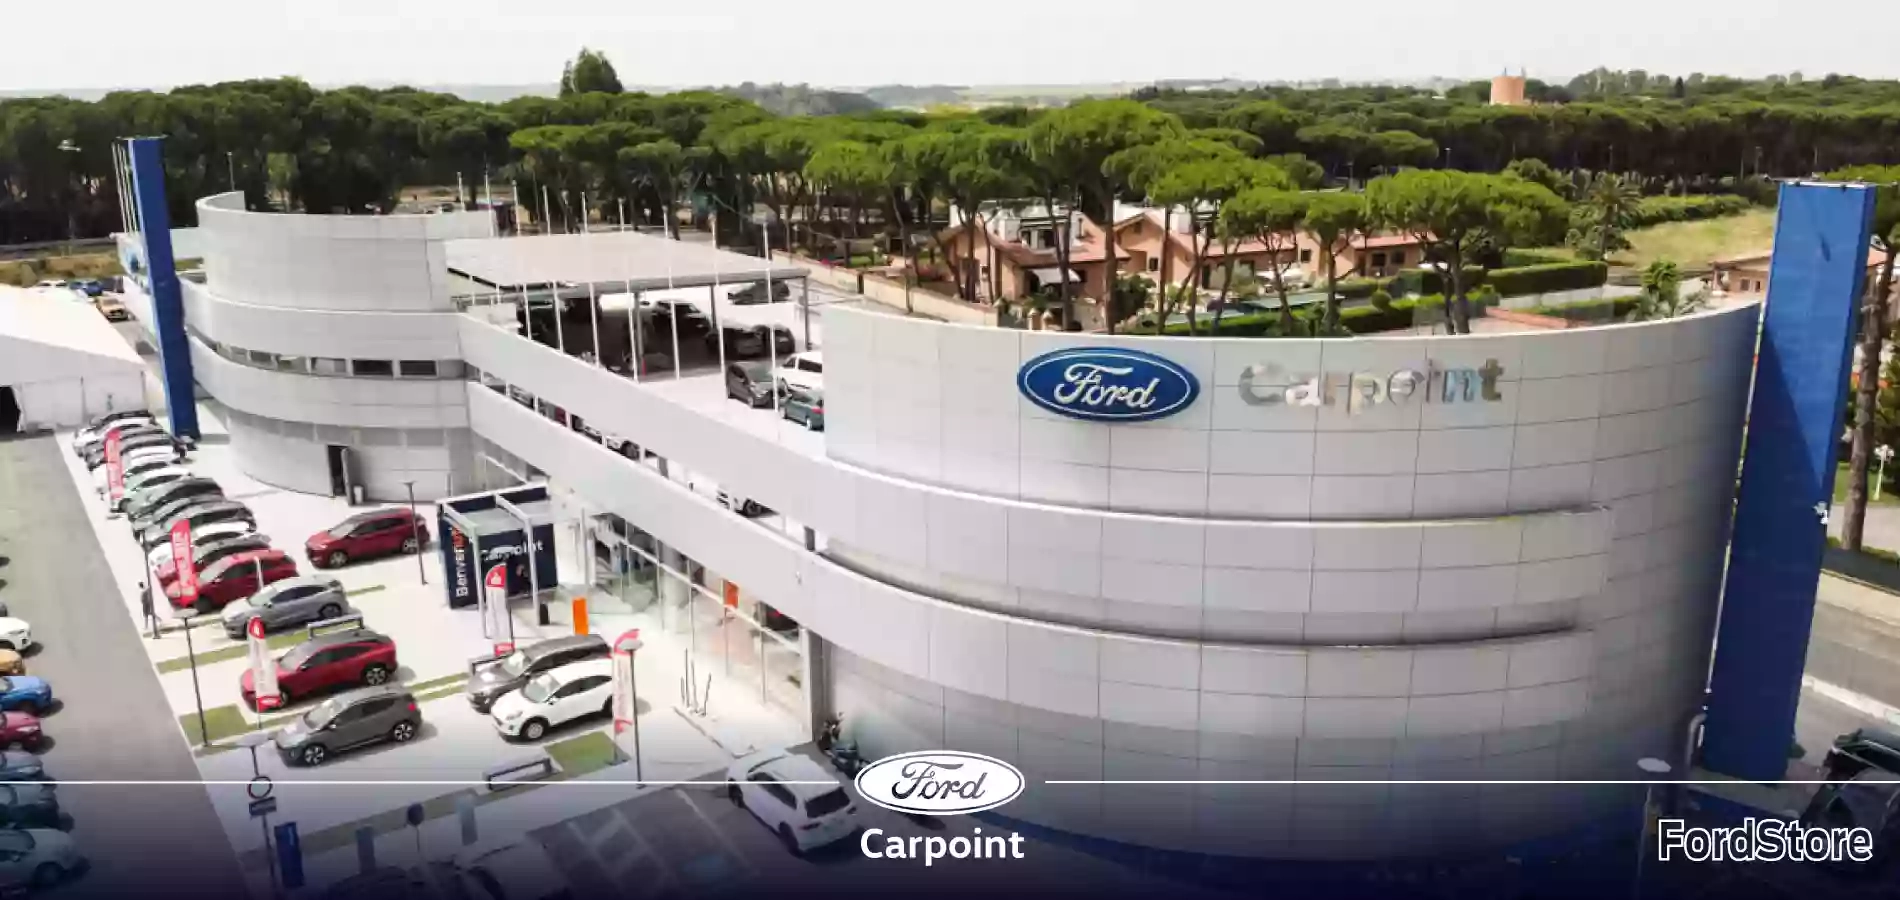 Carpoint Marconi Ford